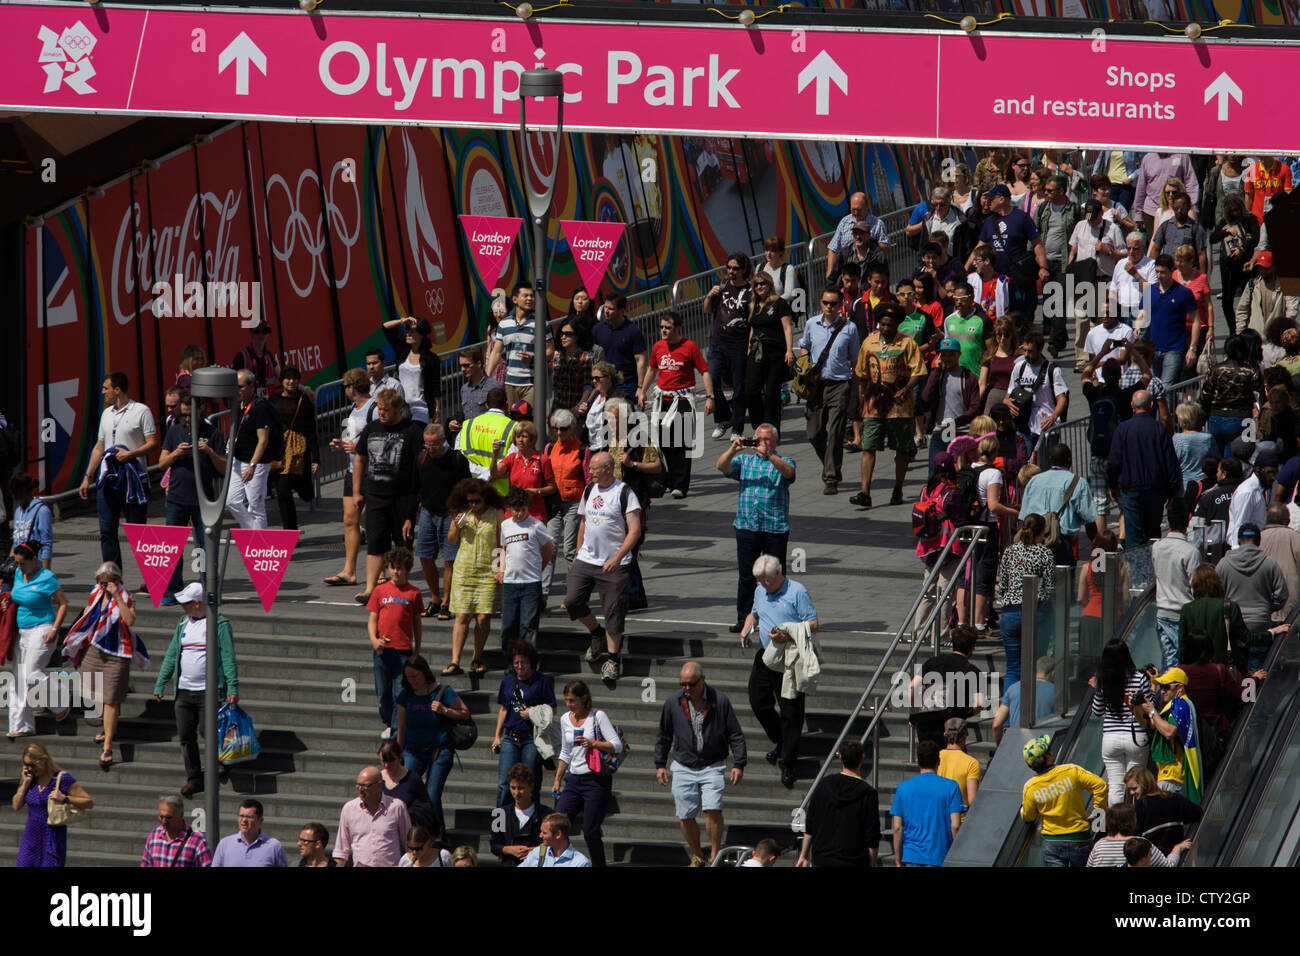 Aerial view of spectator crowds at the Westfield City shopping complex, Stratford that leads to the Olympic Park during the London 2012 Olympics, the 30th Olympiad. Large Coca-Cola ads line the walkway to the Olympic Park. Situated on the fringe of the 2012 Olympic park, Westfield is Europe's largest urban shopping centre. The £1.45bn complex houses more than 300 shops, 70 restaurants, a 14-screen cinema, three hotels, a bowling alley and the UK's largest casino. Stock Photo